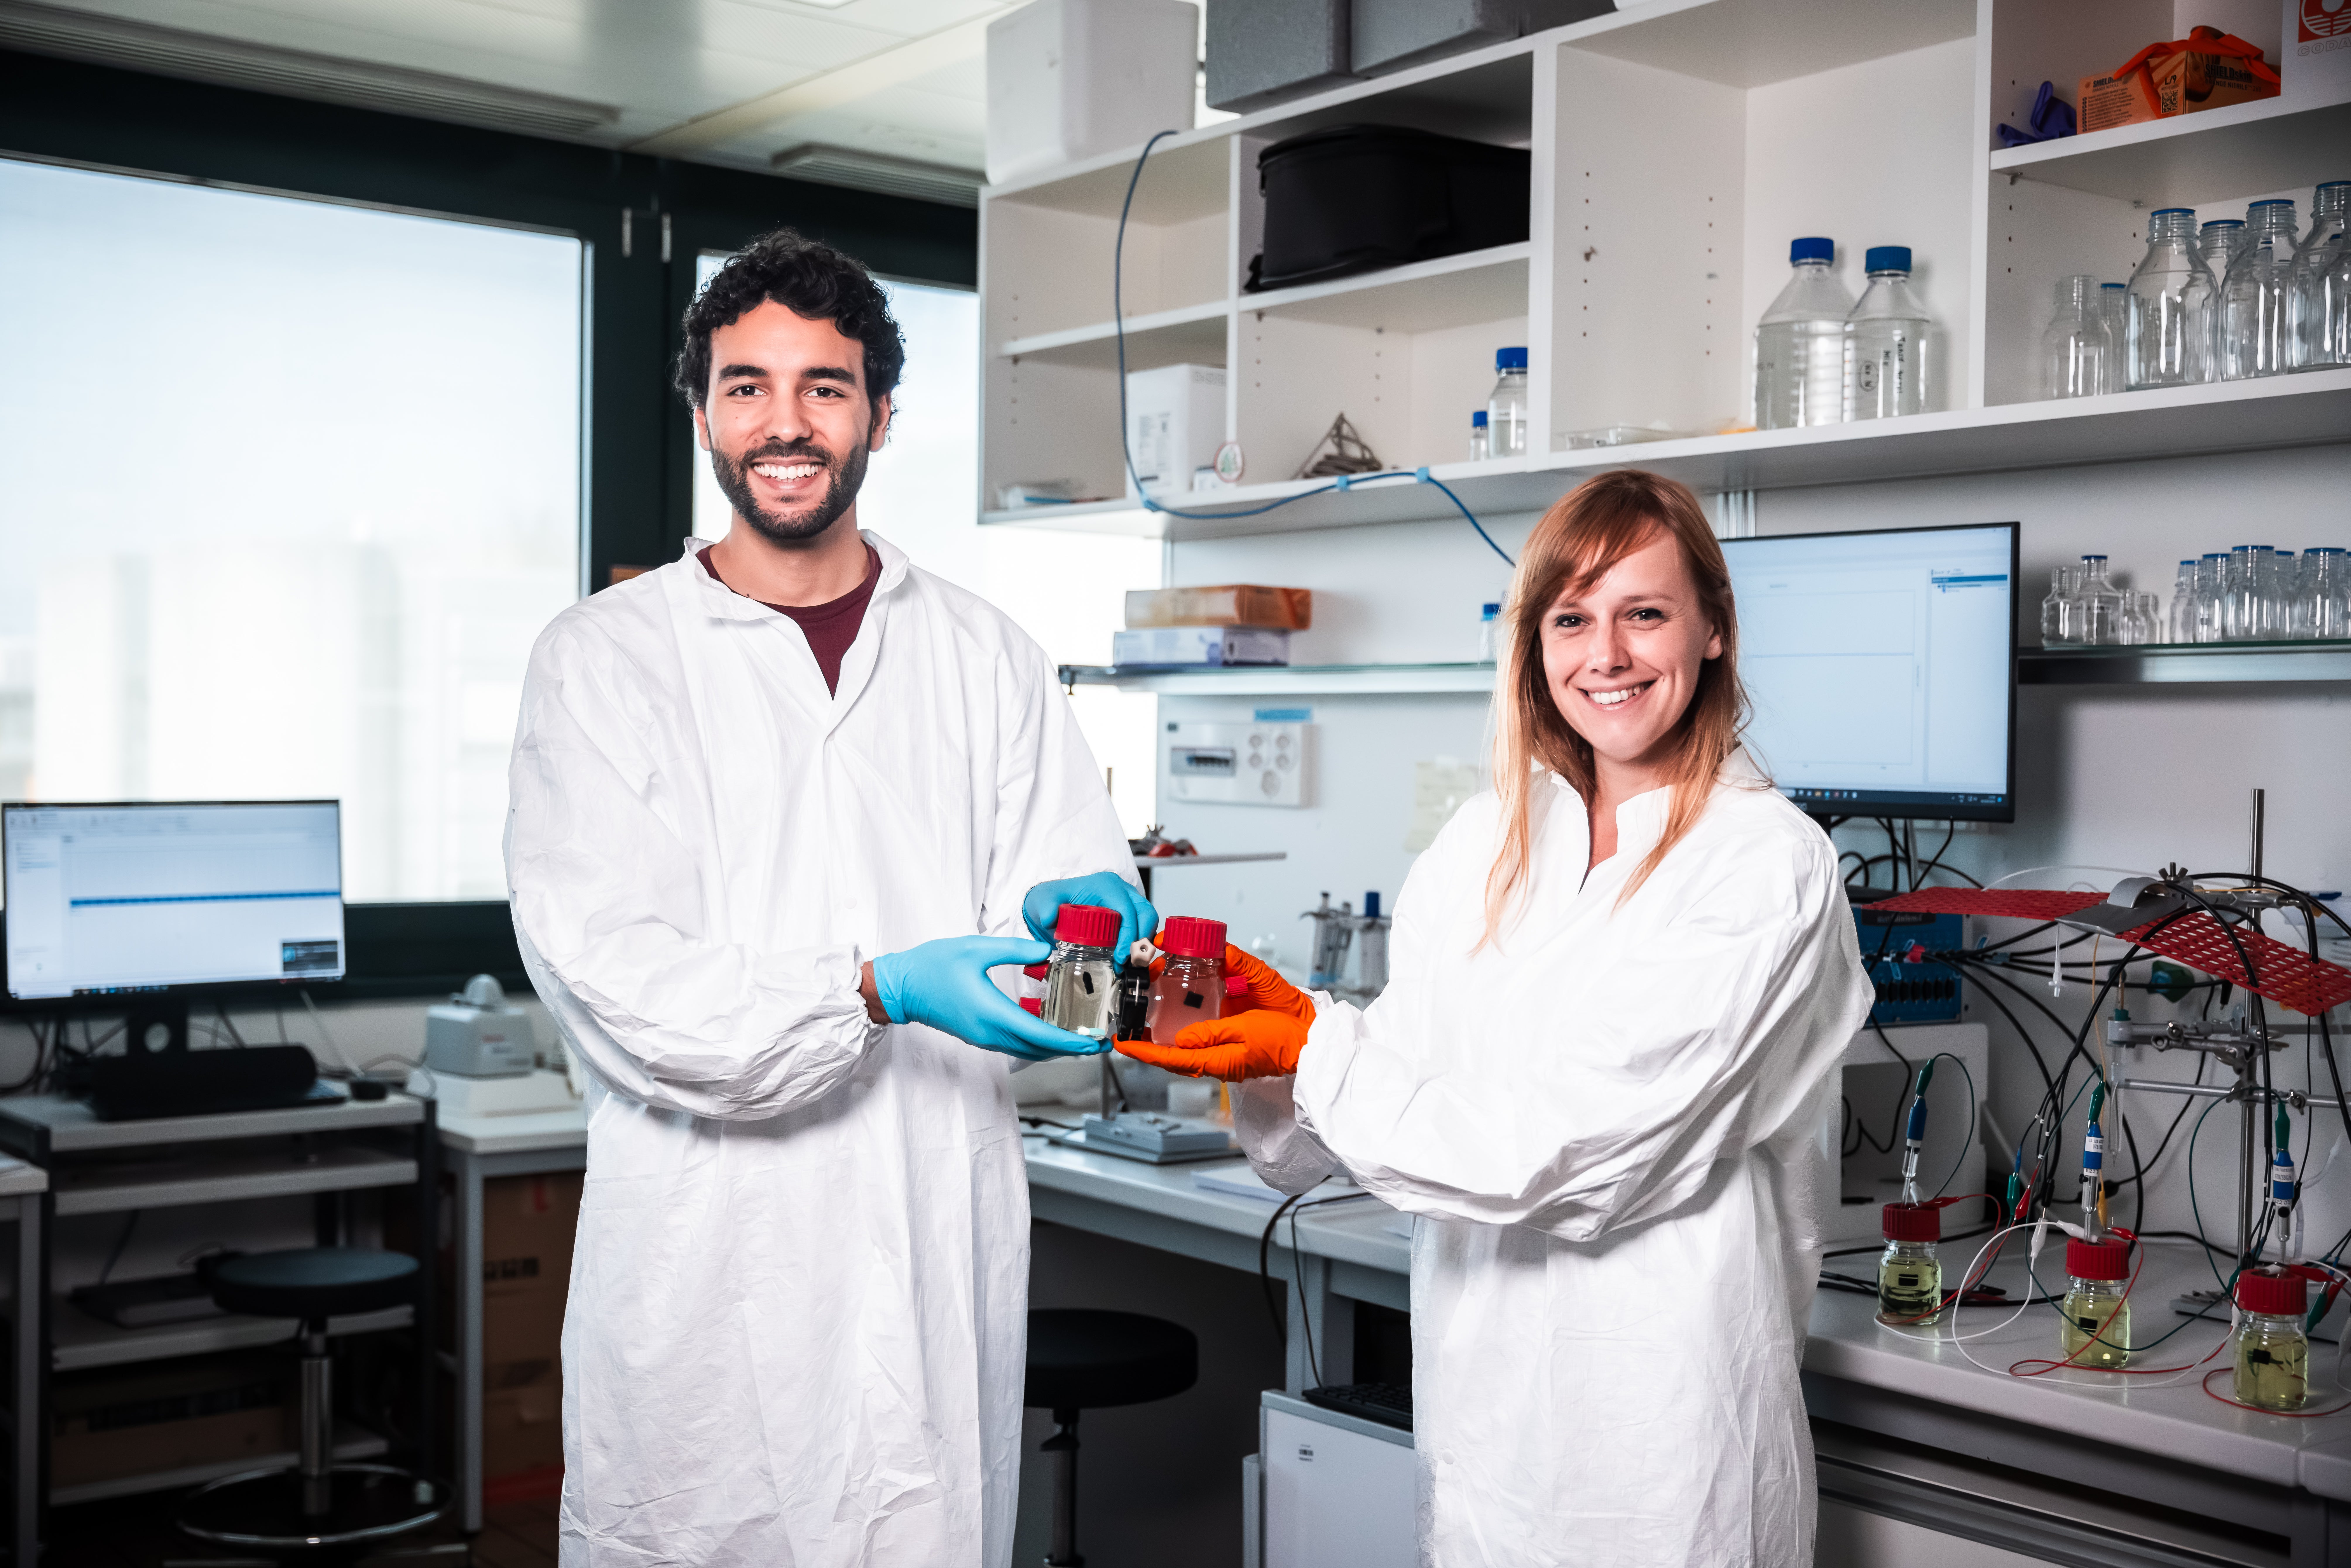 Mohammed Mouhib and Melania Reggente, the study’s lead scientists, at their lab at EPFL